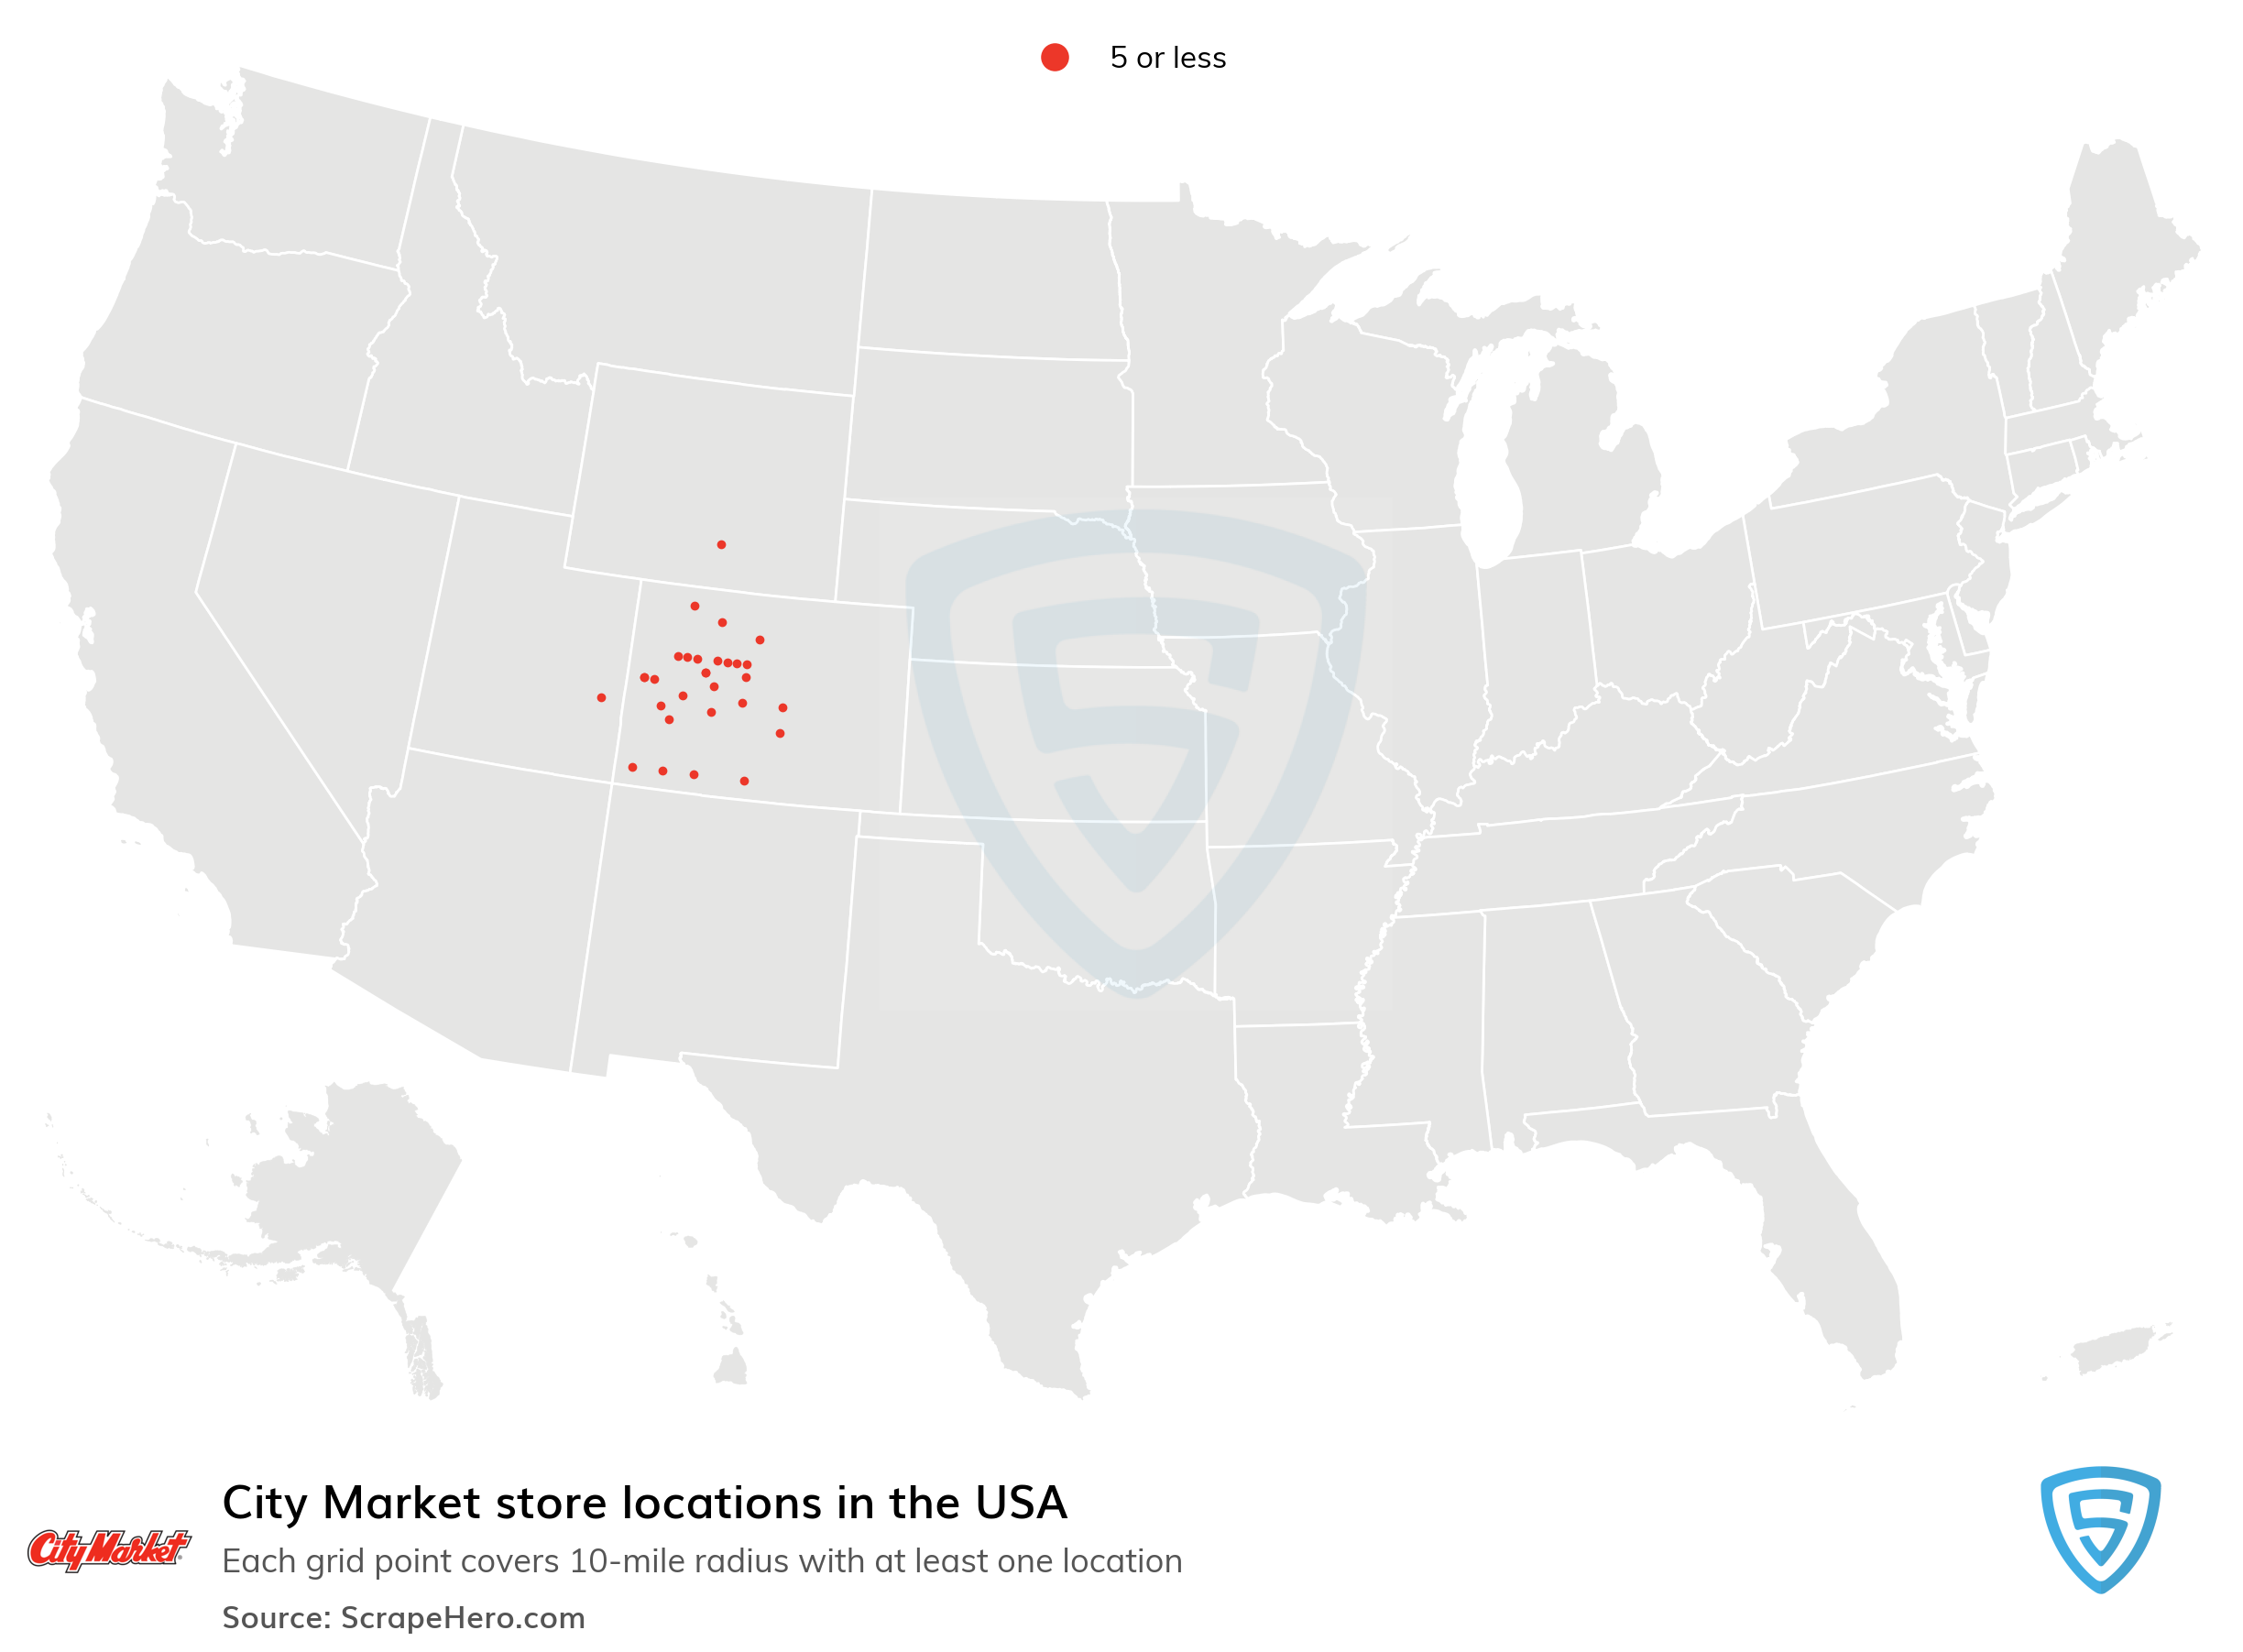 Number of City Market locations in the United States in 10